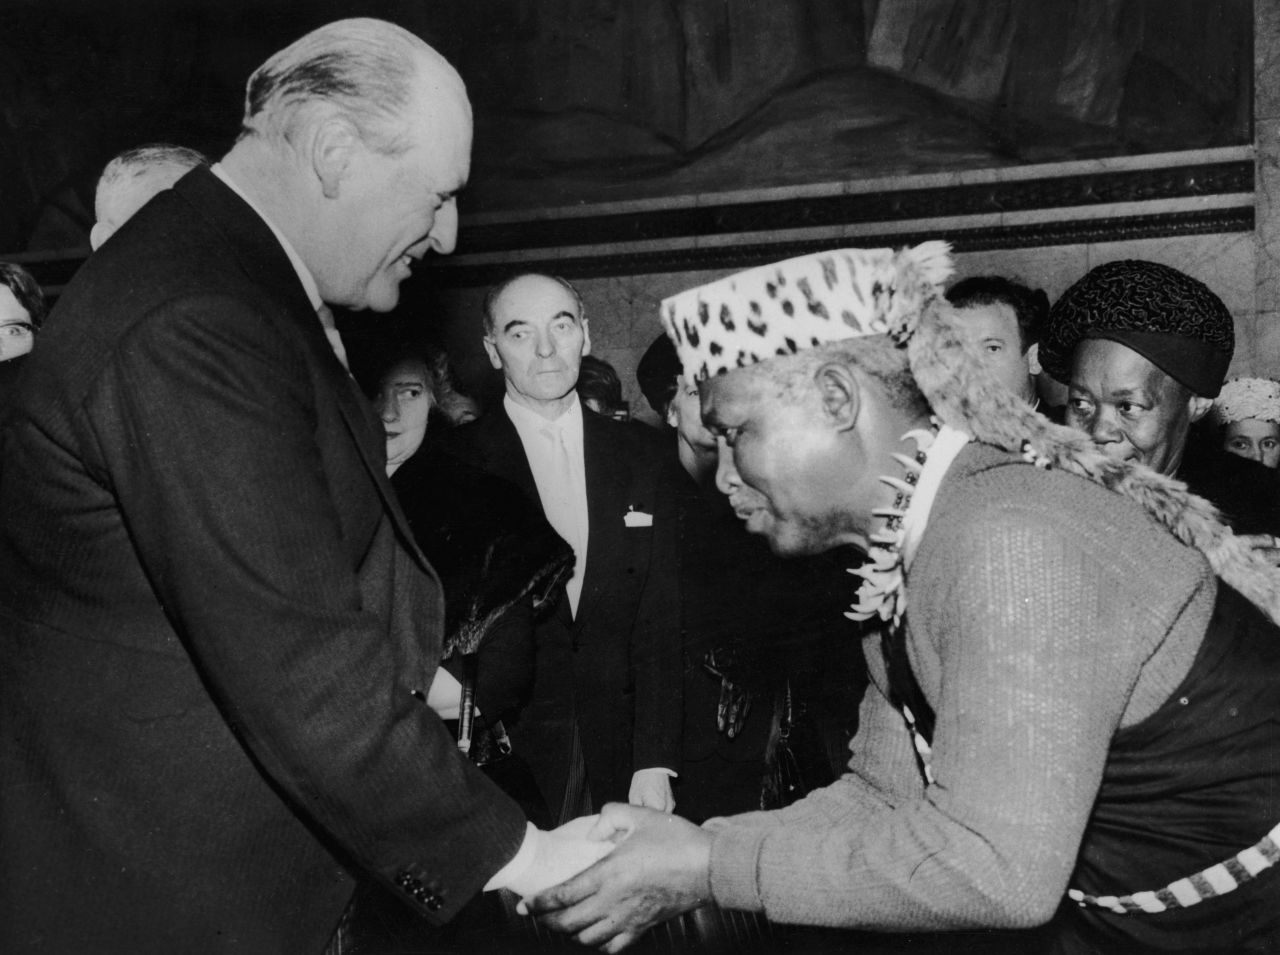 King Olav V of Norway, left, shakes hands with Albert Lutuli, president-general of the African National Congress, after receiving the Nobel Peace Prize in 1960 in Oslo. 